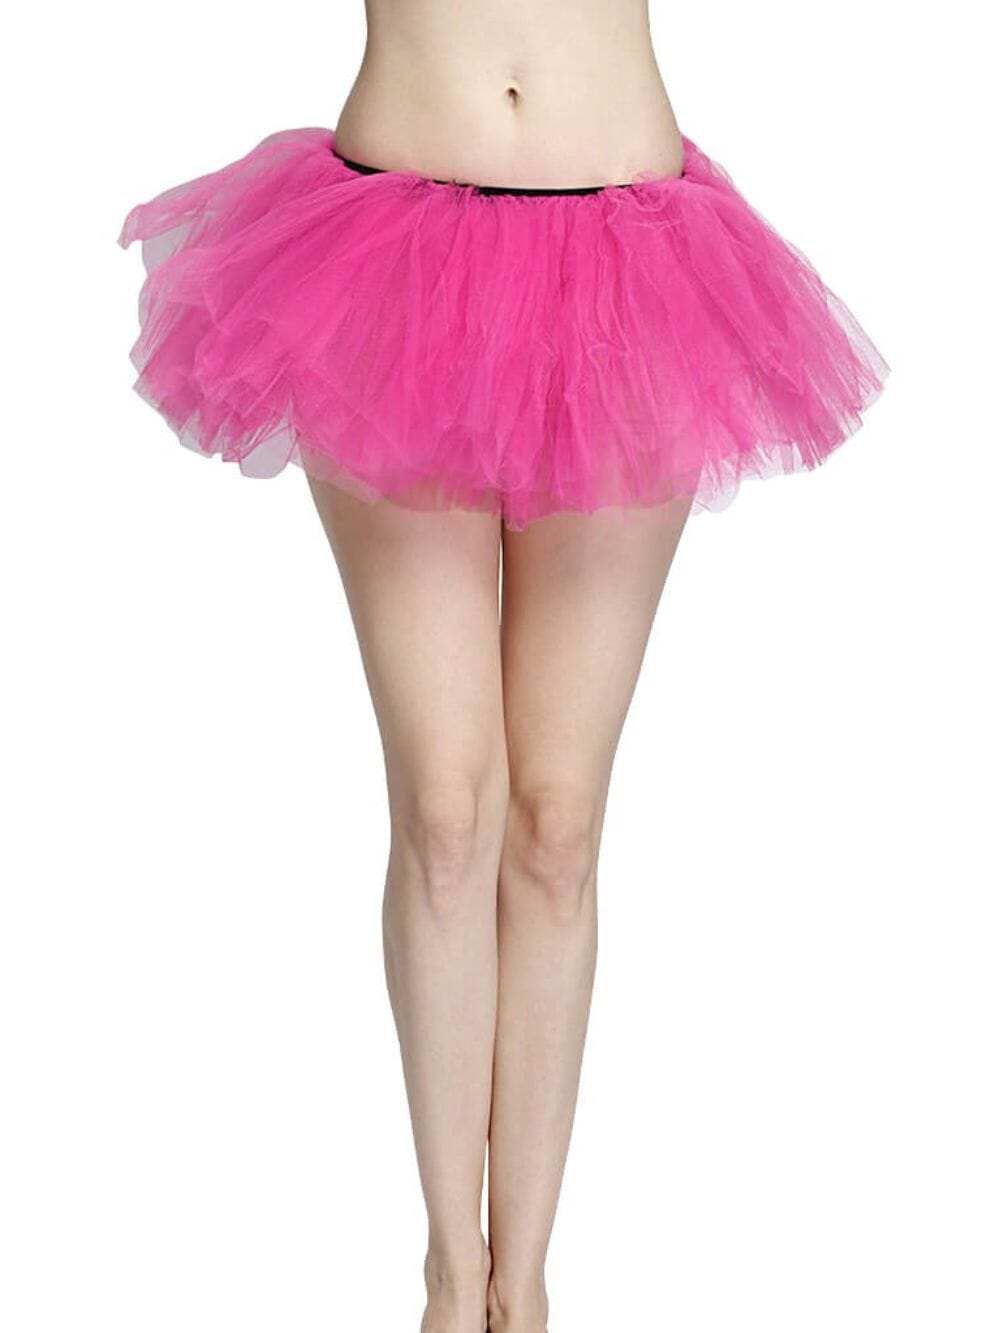 Hot Pink - 5 Layer Tutu Skirt for Running, Dress-Up, Costumes - Sydney So Sweet